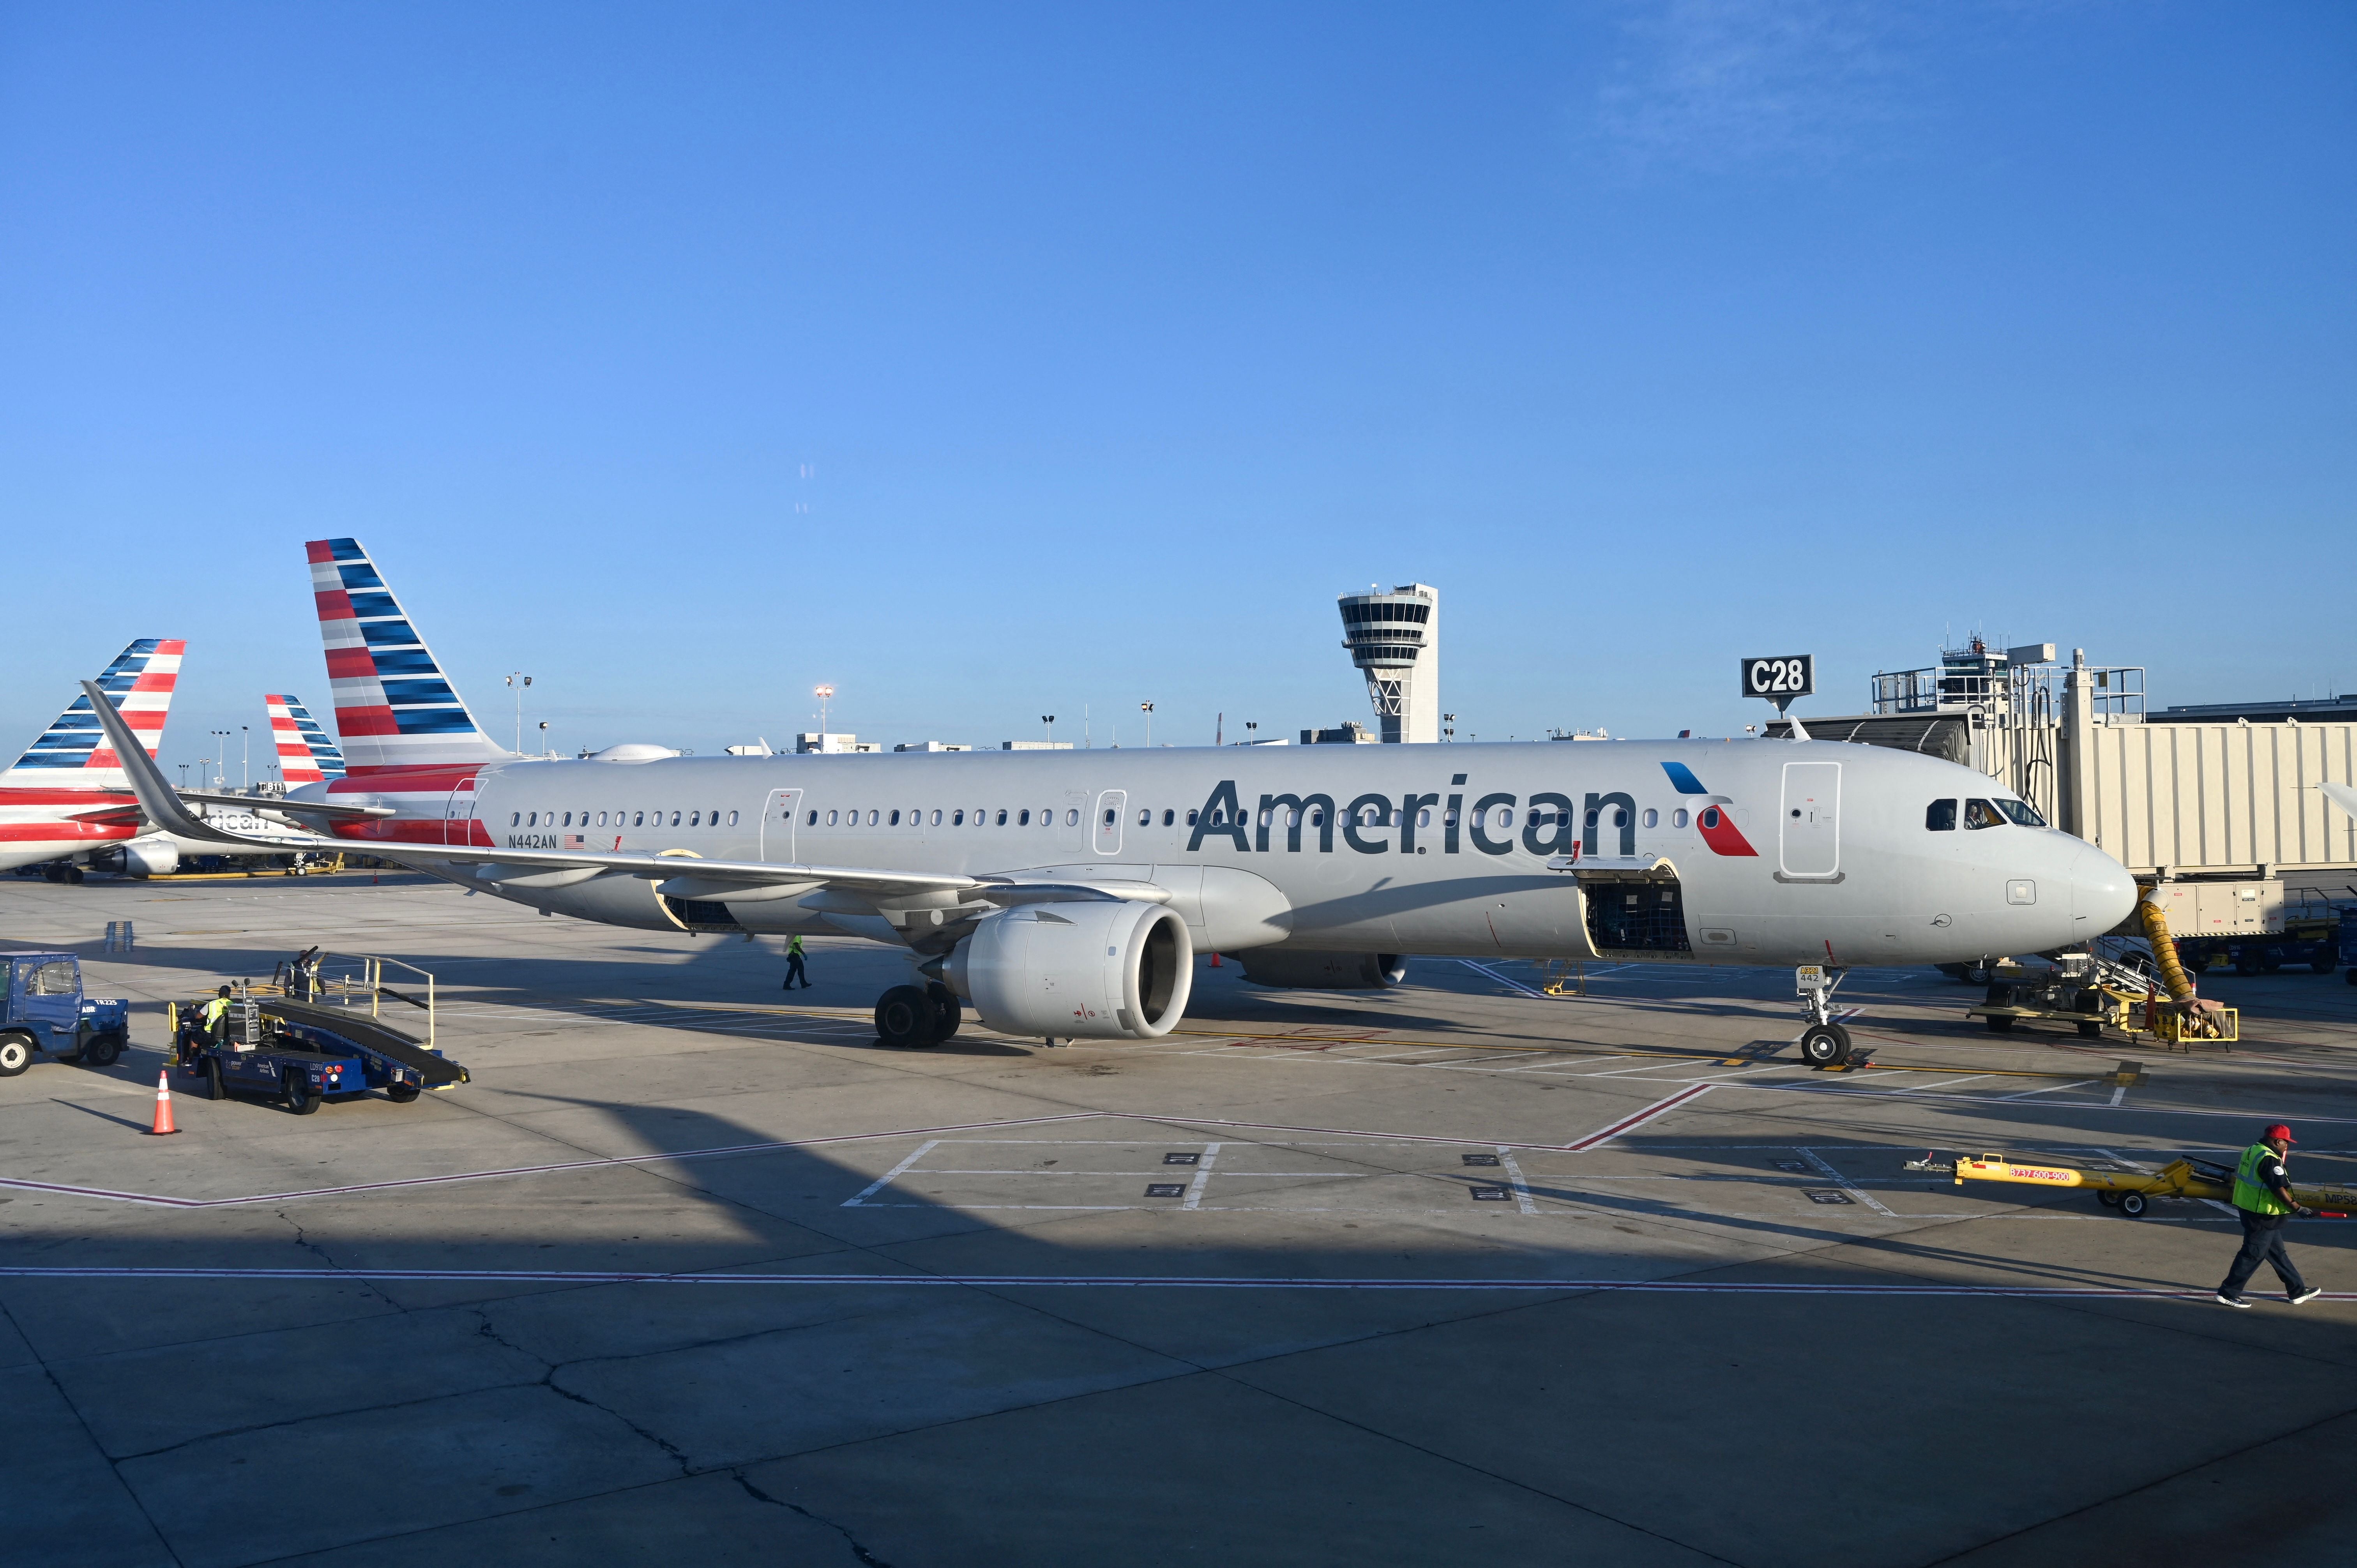 Incident unfolded aboard an American Airlines flight from Argentina to Miami